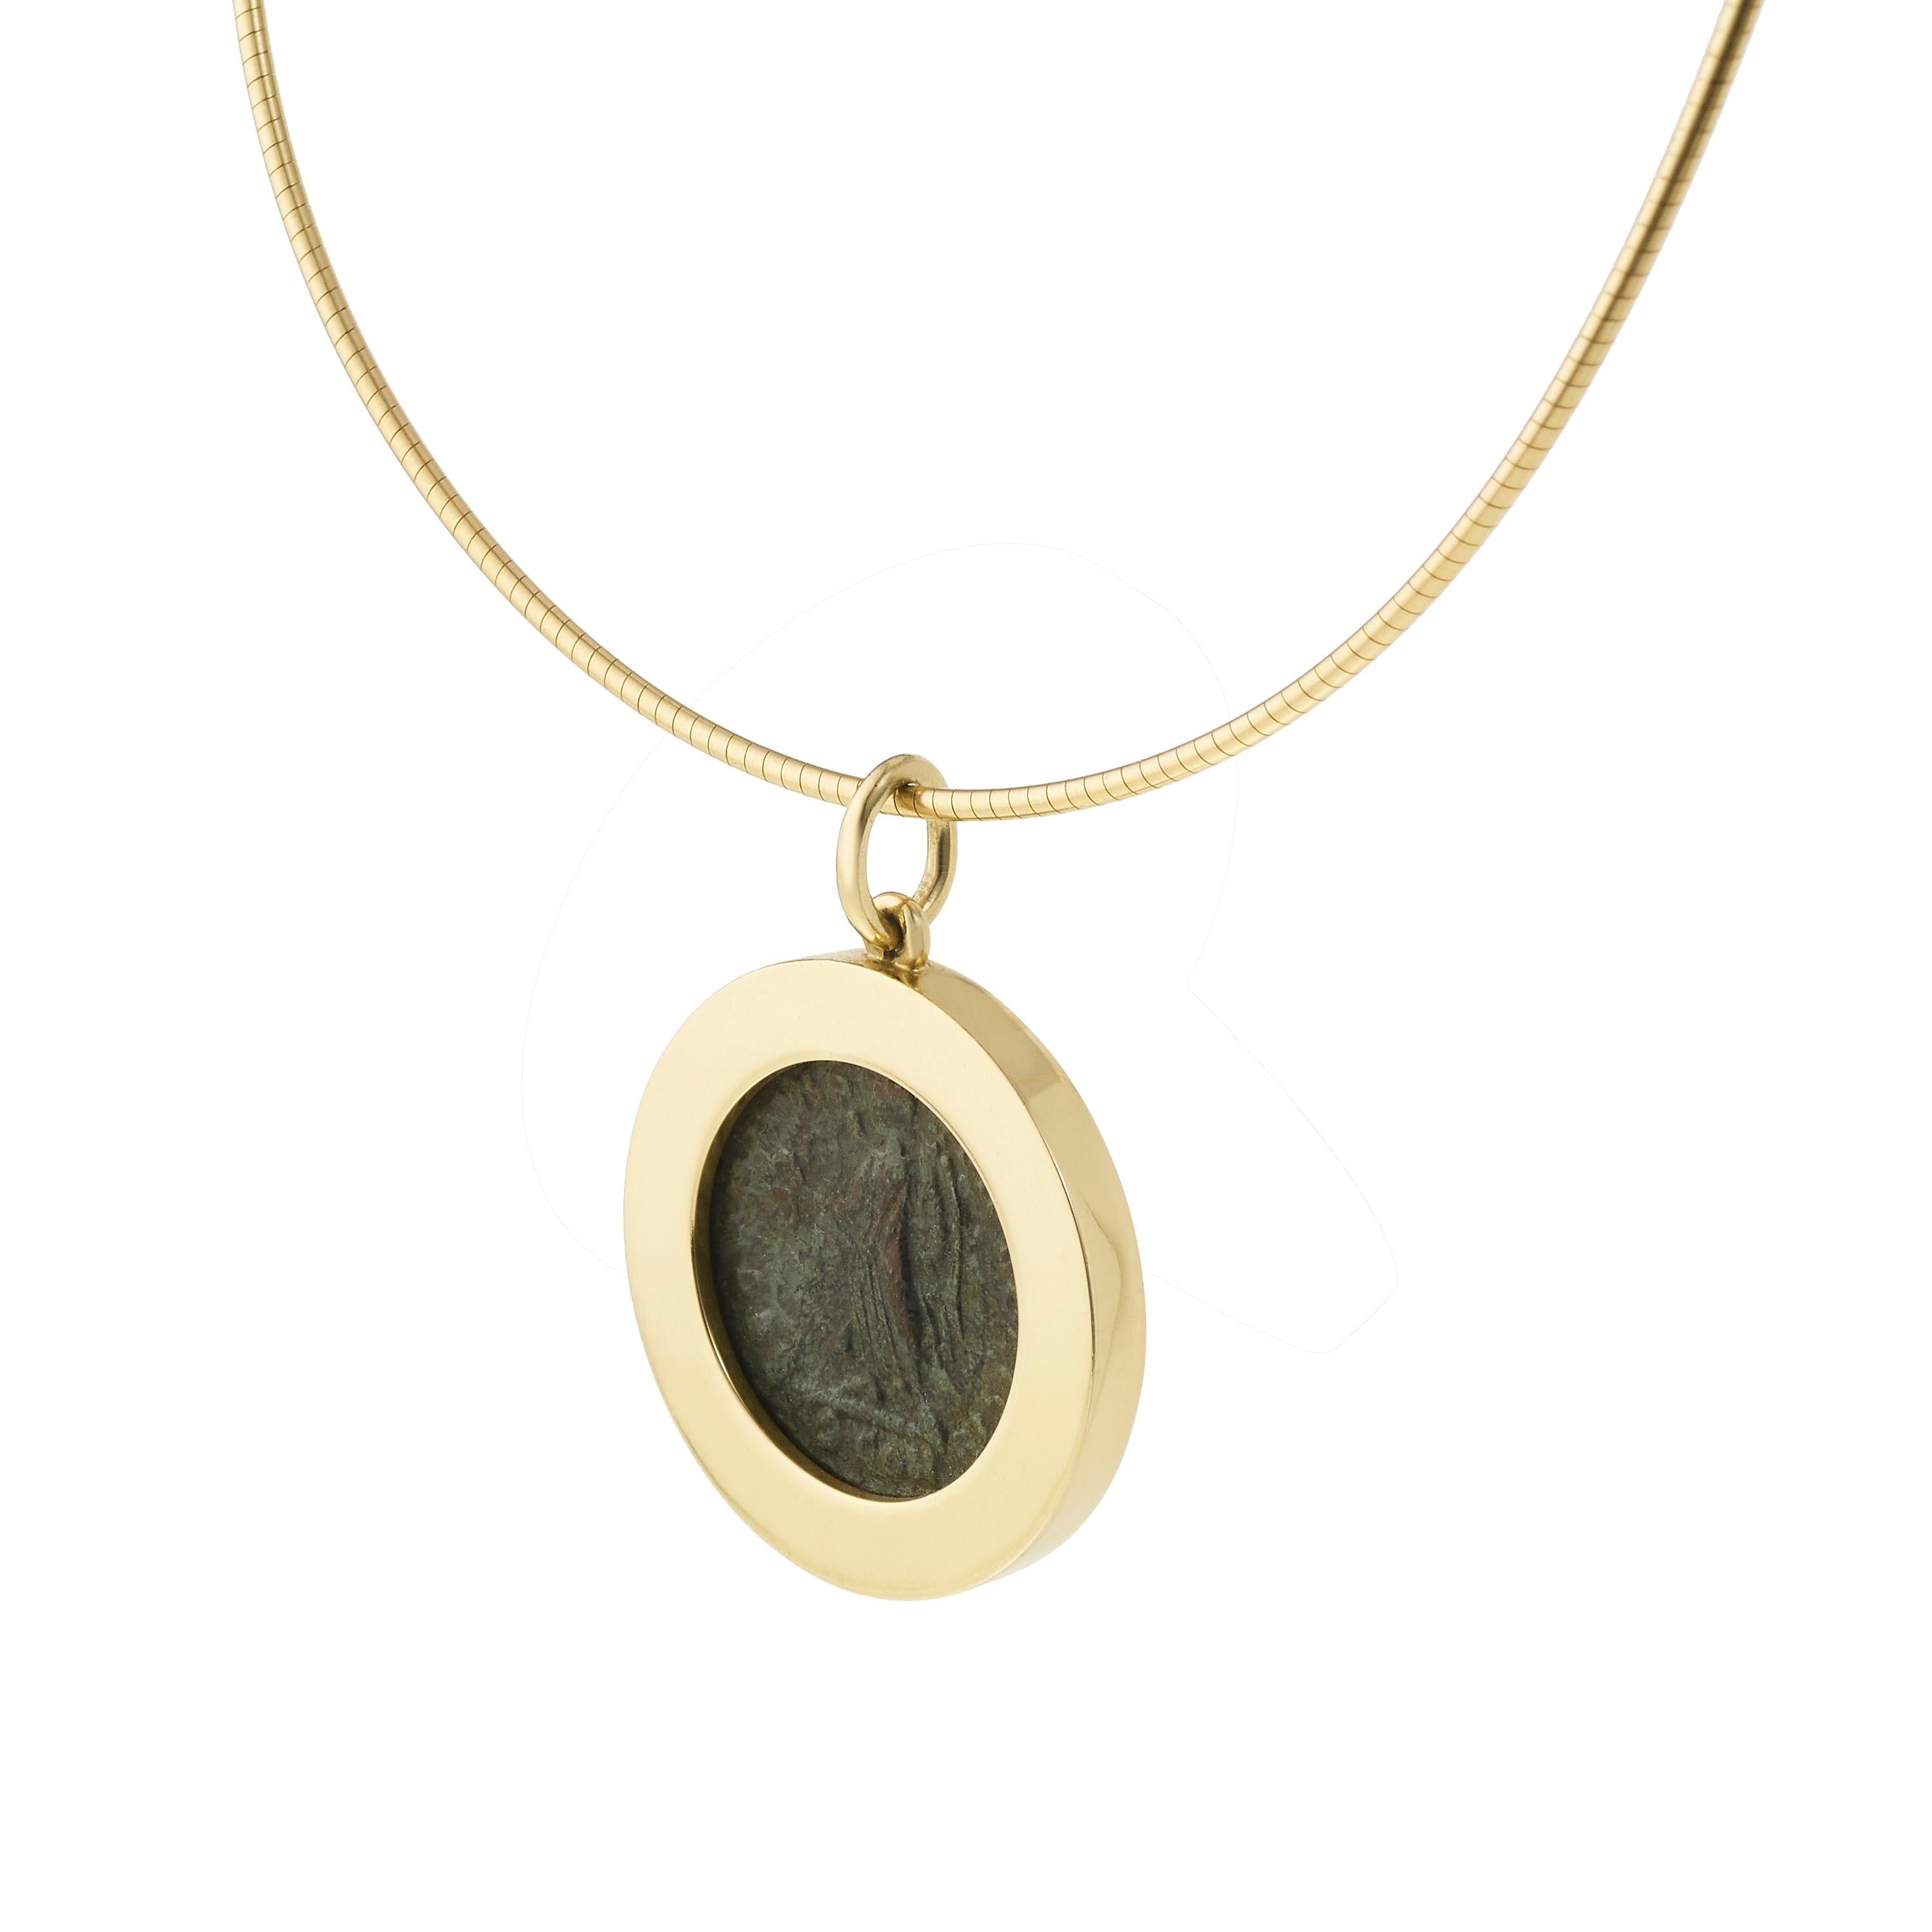 Victoria Strigini (b. 1991) 

A contemporary 18k yellow gold pendant necklace featuring an ancient Roman bronze coin from 364 AD. The classical bronze depicts the Roman emperor Valens (reigned 364 - 378) on the front and a Victory on the reverse.